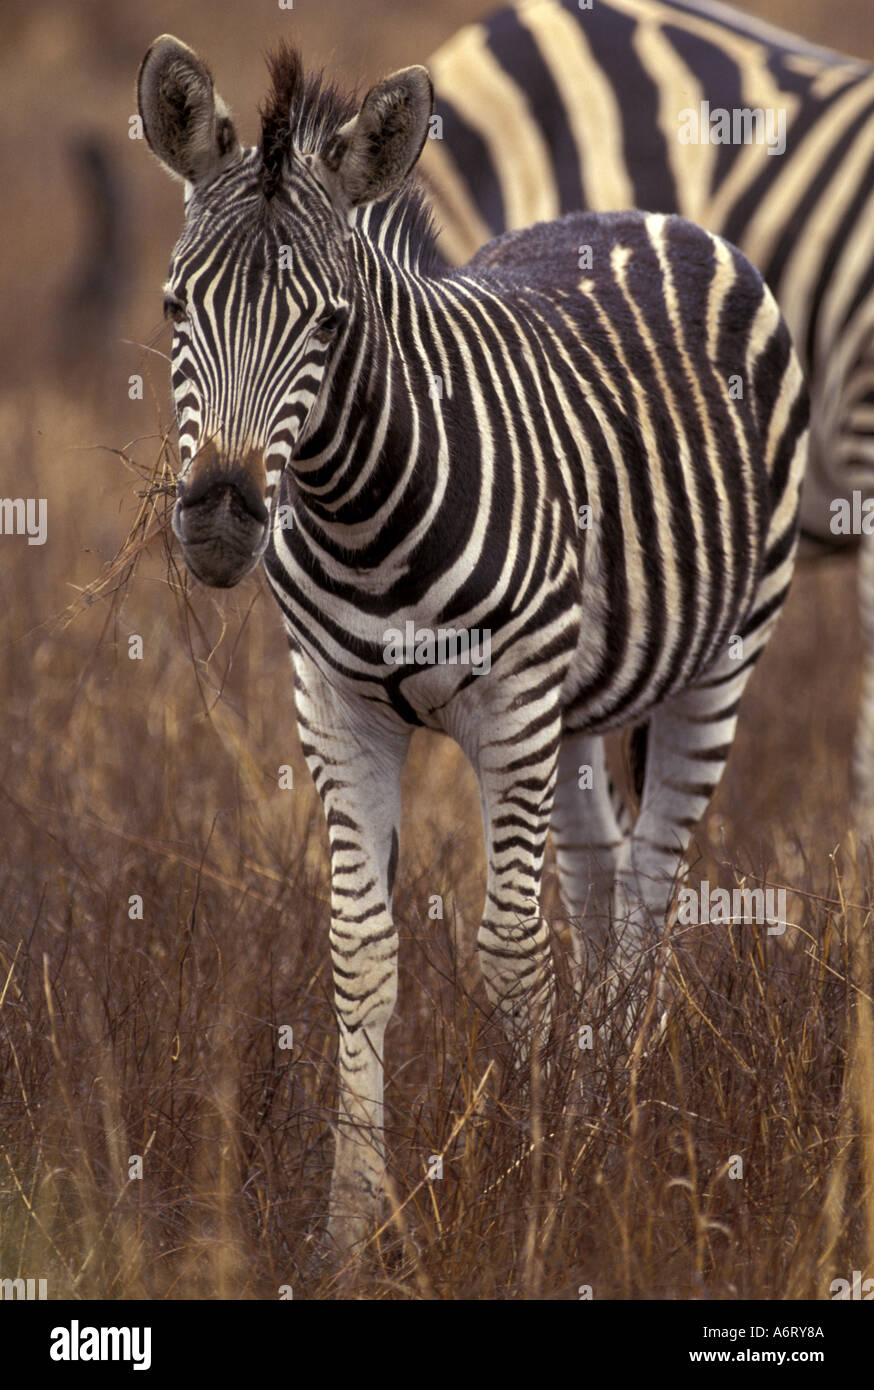 Africa, South Africa, Kruger N.P Baby Zebra Stock Photo